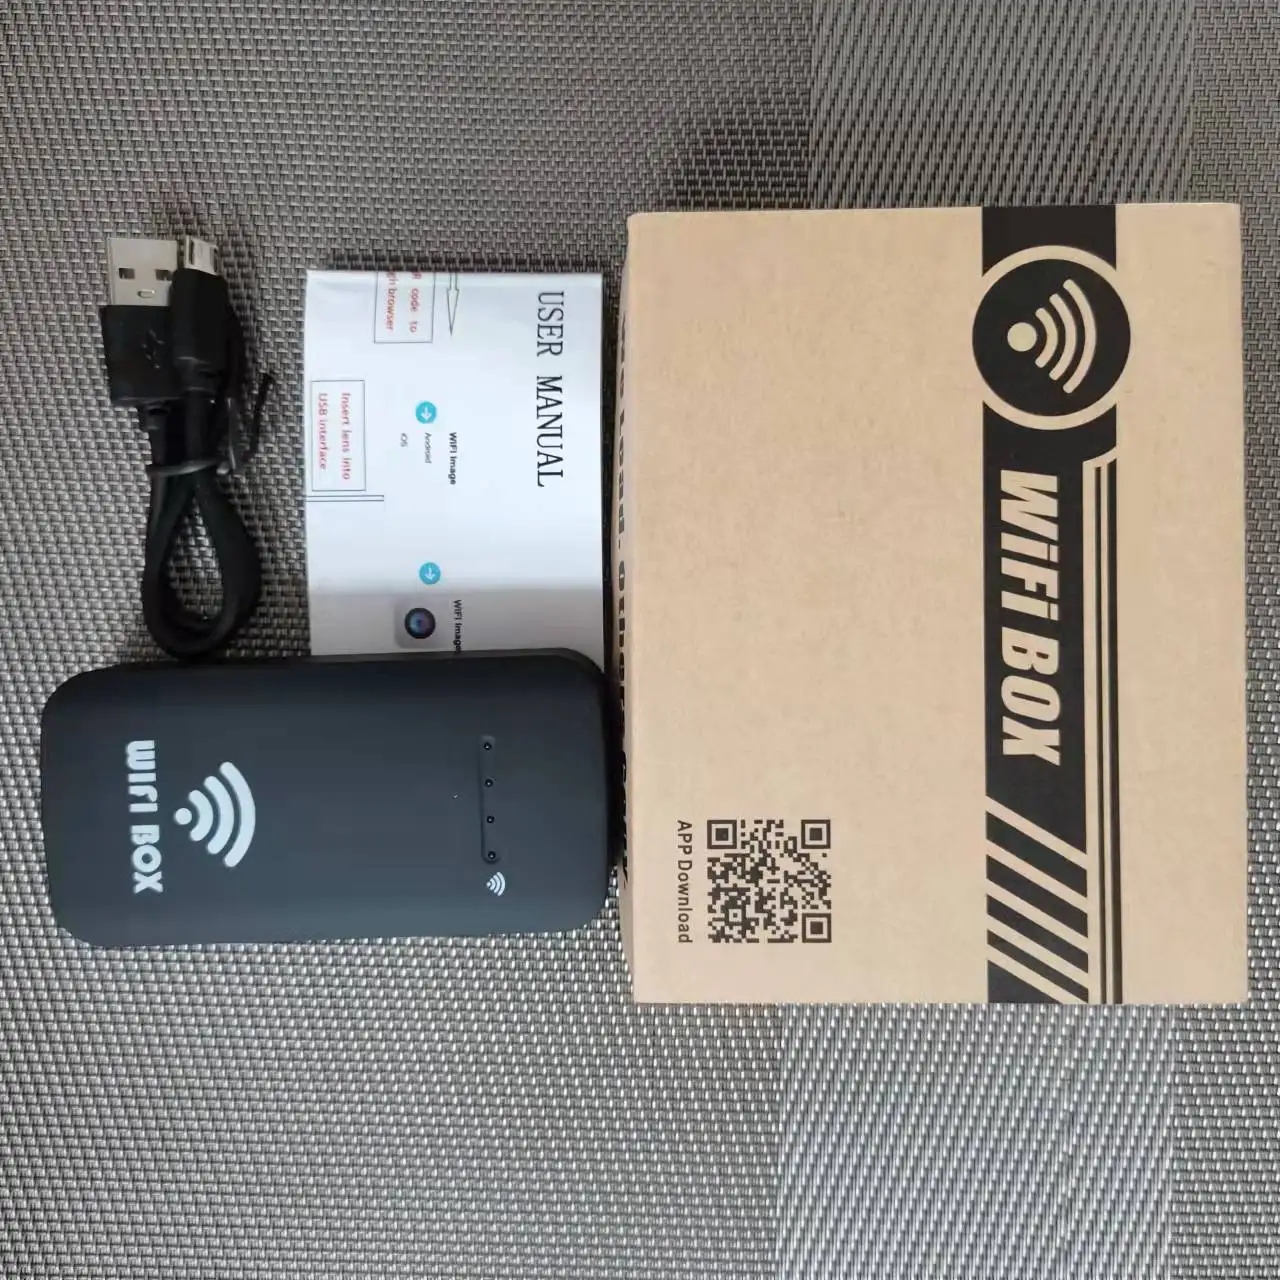 Wifi Transmitter Box for USB Endoscope Camera Borescope 1200P 720P 480P Resolution Compatible with Android iOS Device